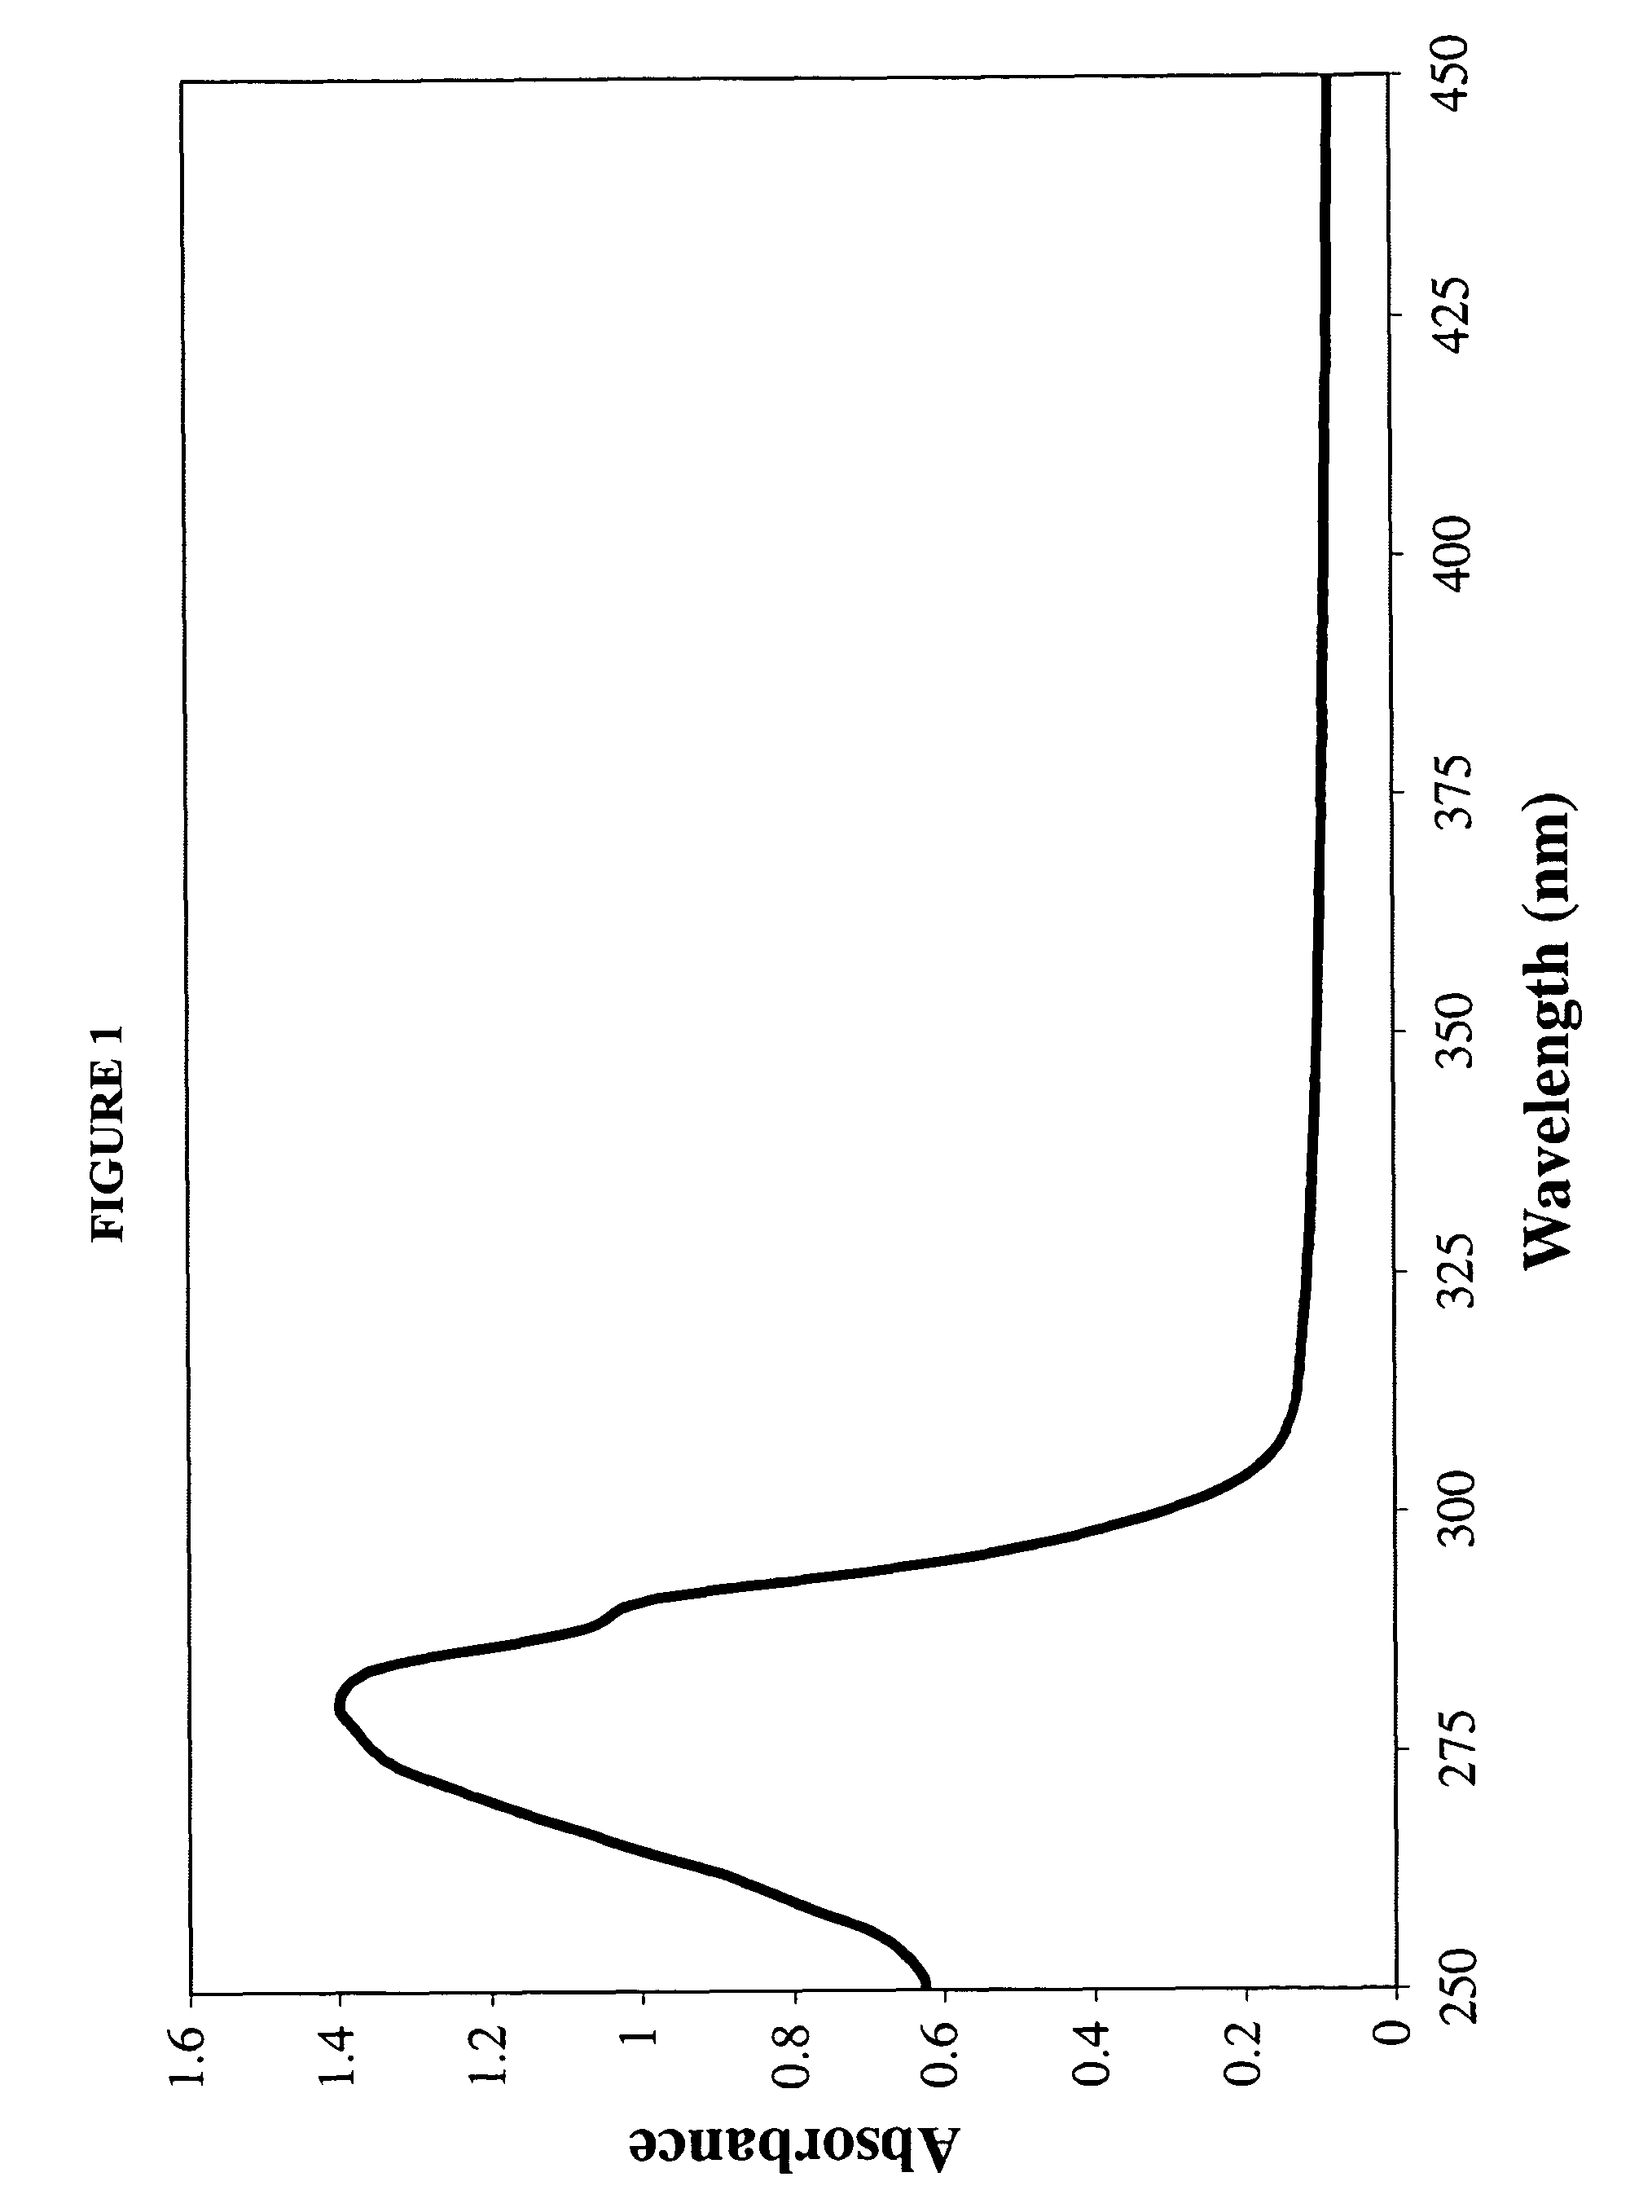 Processes for the preparation of lipophilic drug delivery vehicles